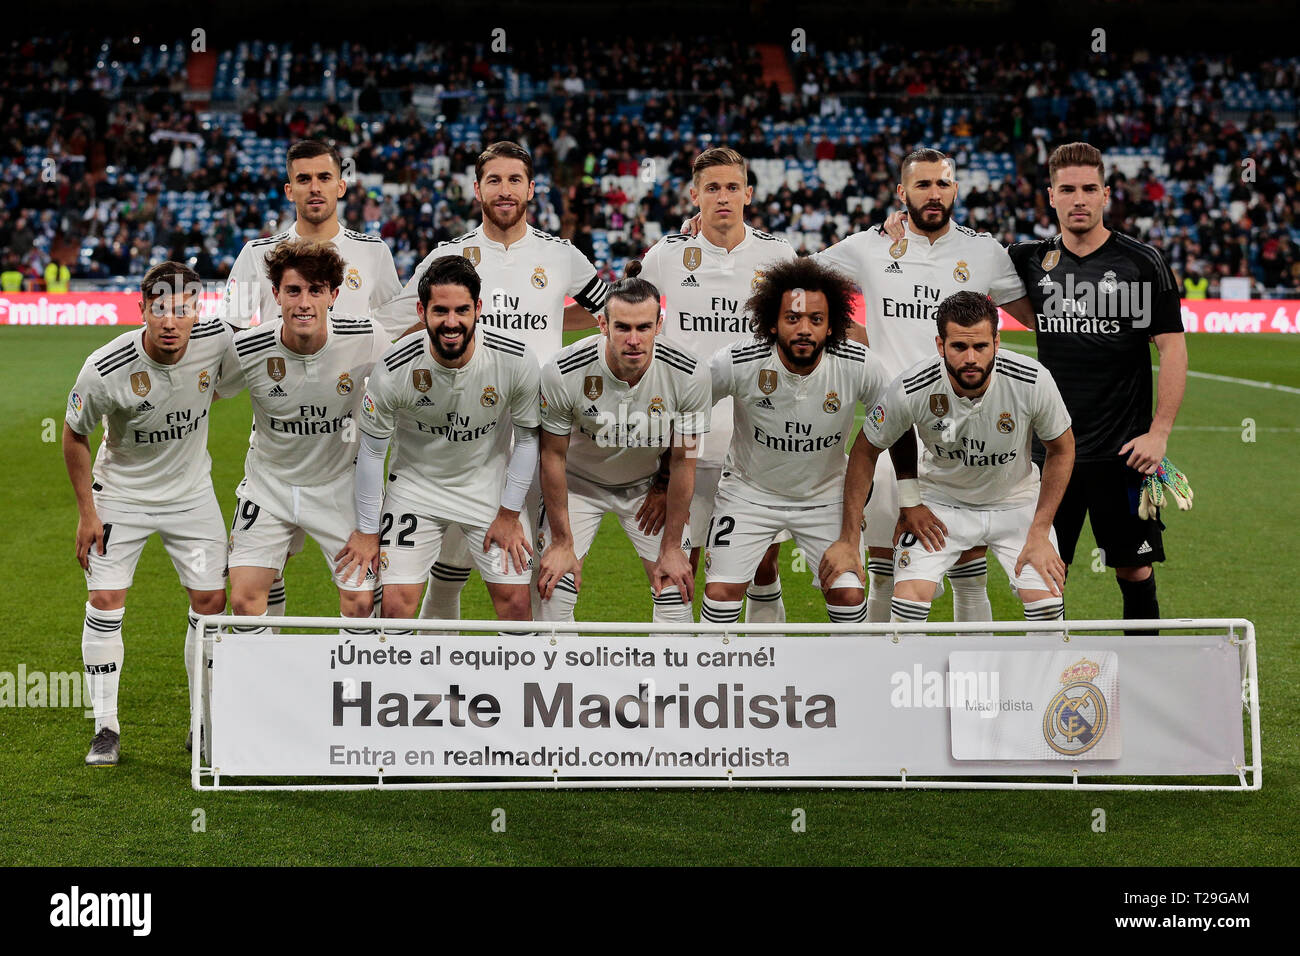 Real Madrid's team photo during La Liga match between Real Madrid and SD Huesca at Santiago Bernabeu Stadium in Madrid, Spain. Final score: Real Madrid 3 - SD Huesca 2. Stock Photo